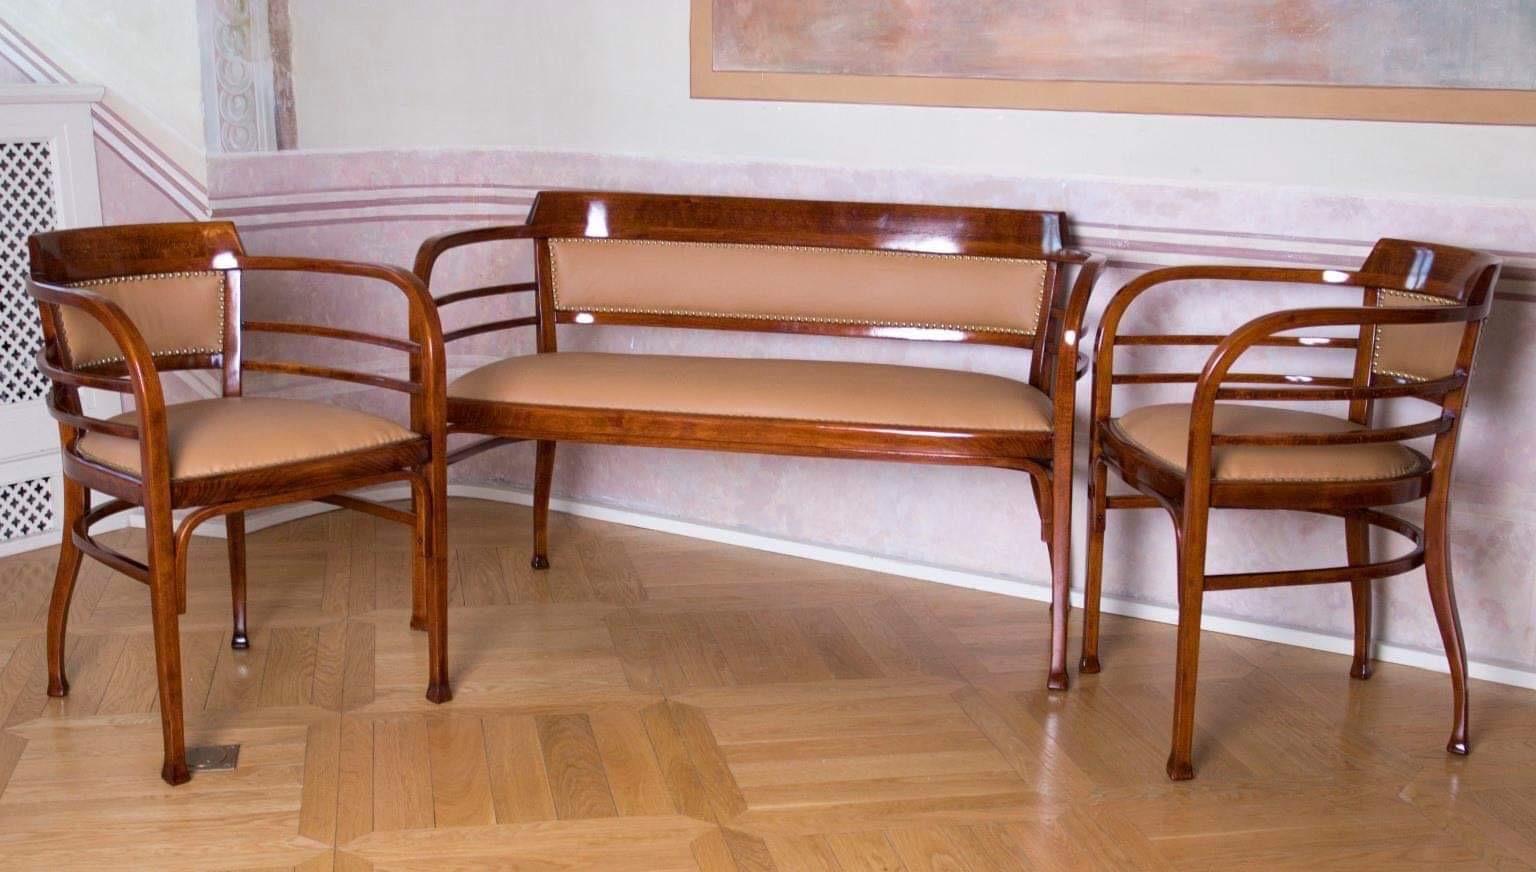 Austrian Art Nouveau Thonet Chairs and Bench by Otto Wagner, Austria 1900’s, Set of 3 For Sale